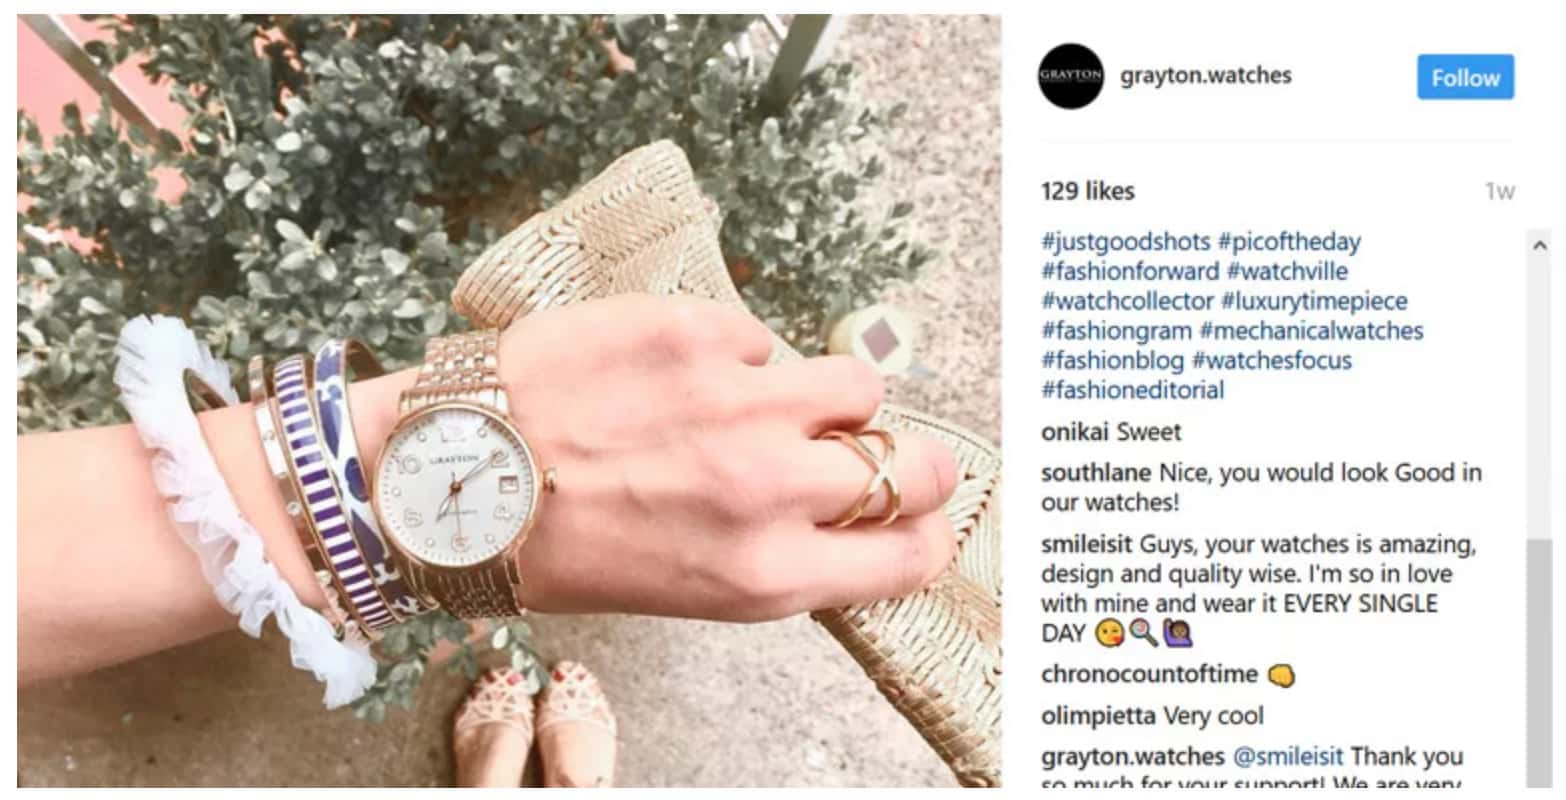 Instagram sample post from grayton.watches.